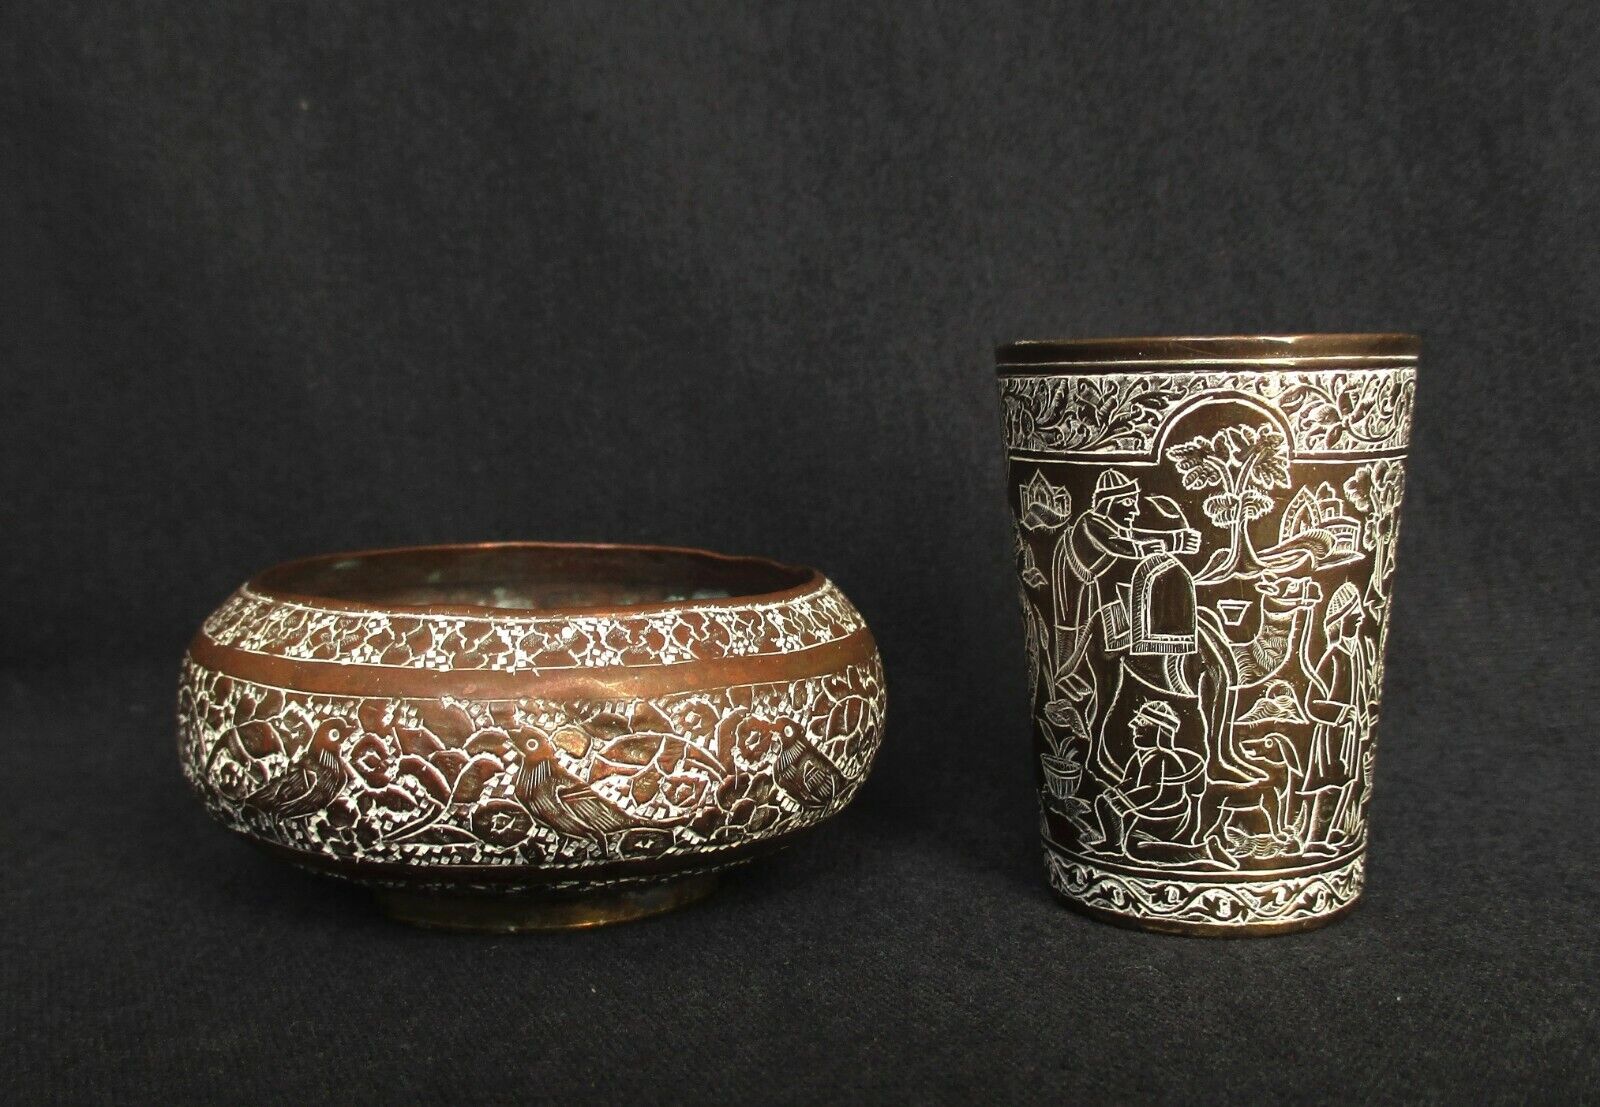 Vintage Israel - Old Mini Bowl & Cup with Miniature Decoration in Etching